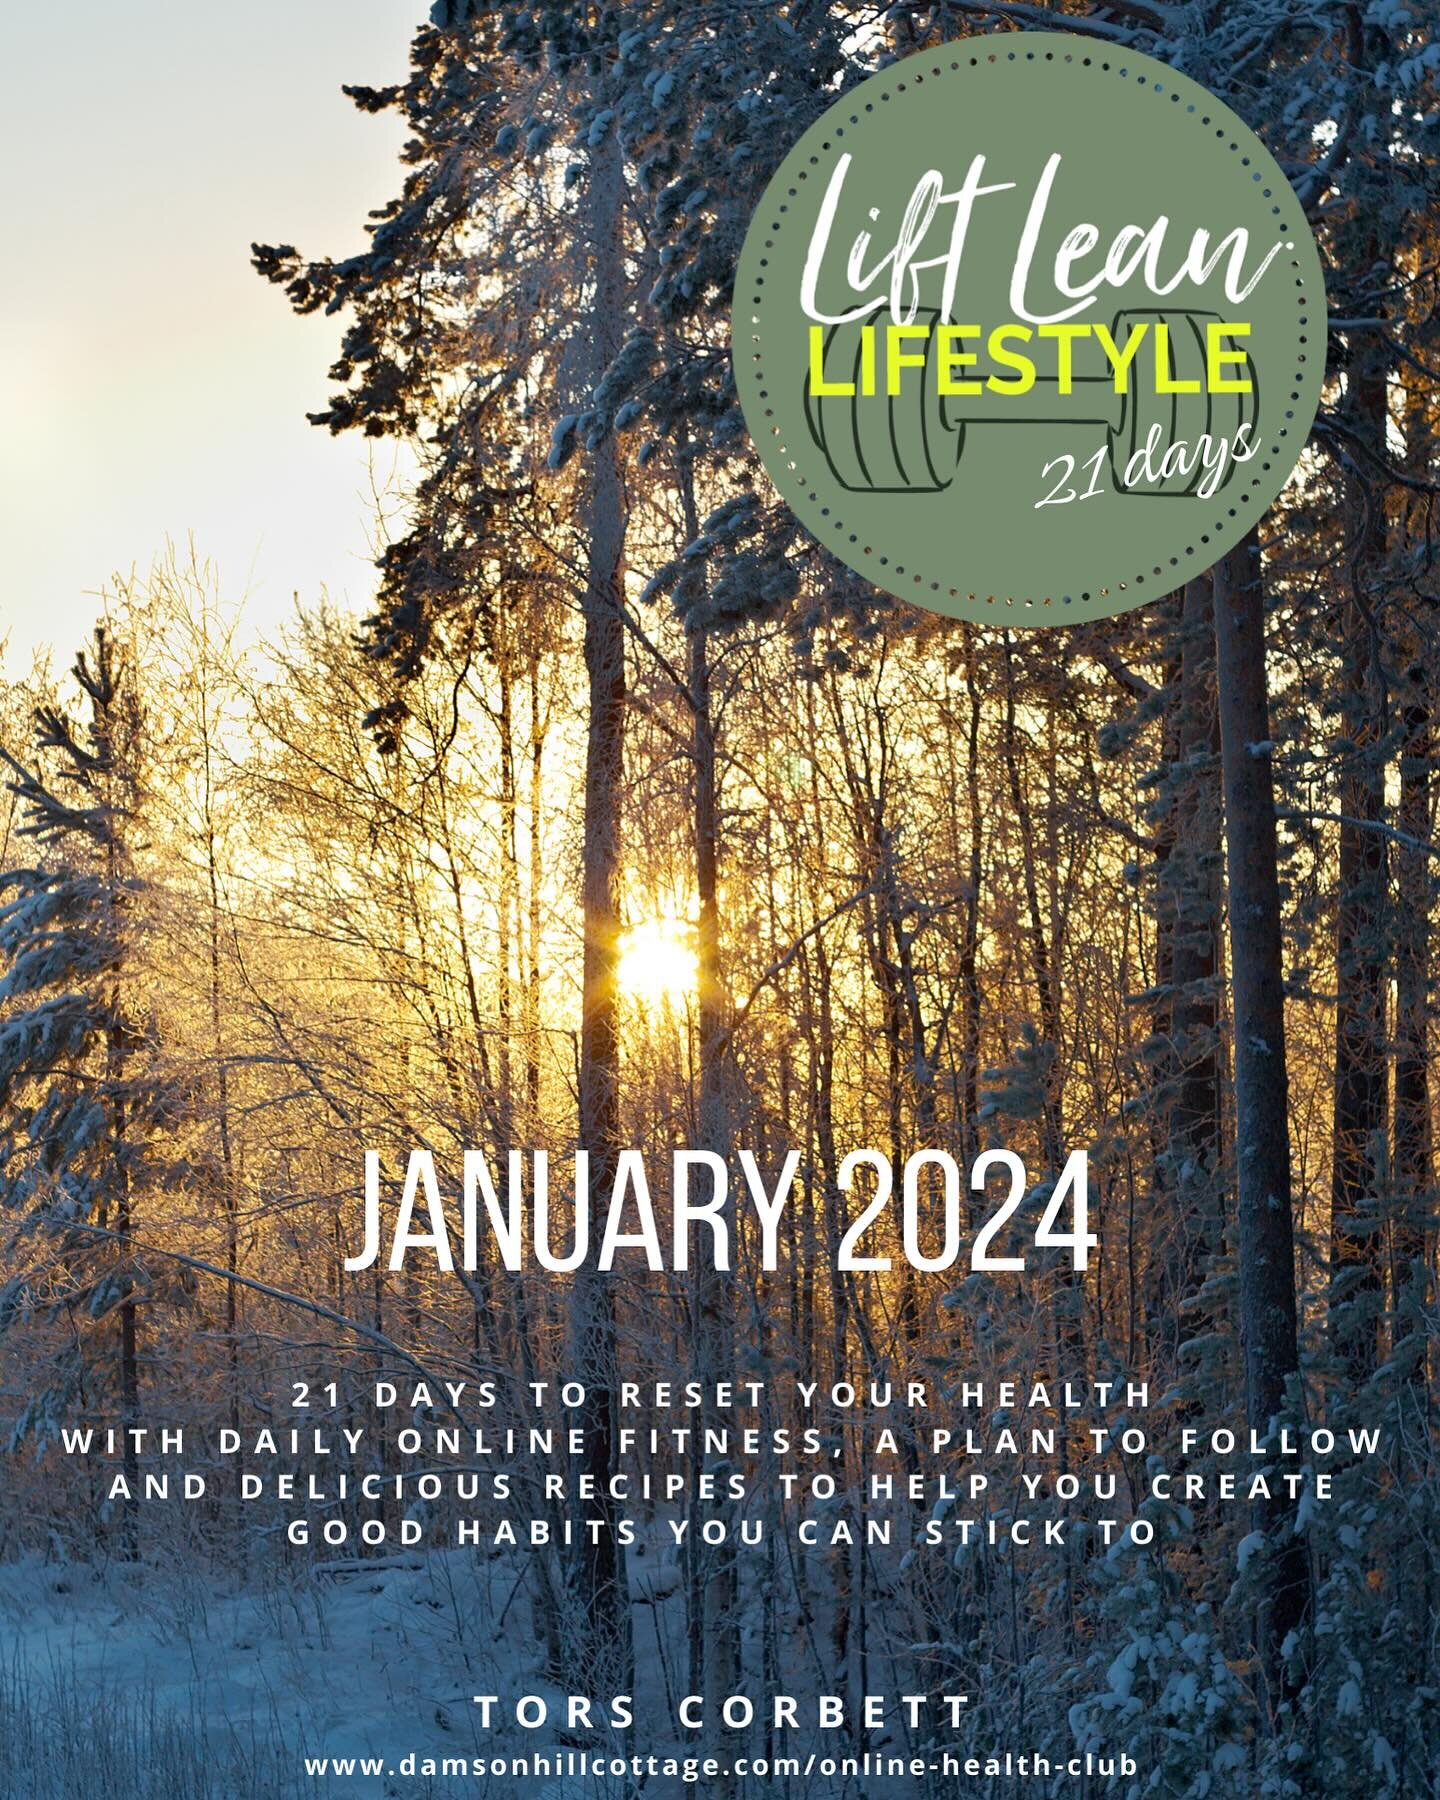 We are nearly ready to begin our feel better mind body and soul boost - Lift Lean Lifestyle starts on Monday! It&rsquo;s not a deprivation diet or a crazy unsustainable fitness plan. Far from it.

It&rsquo;s 21 days of you being able to carve time in